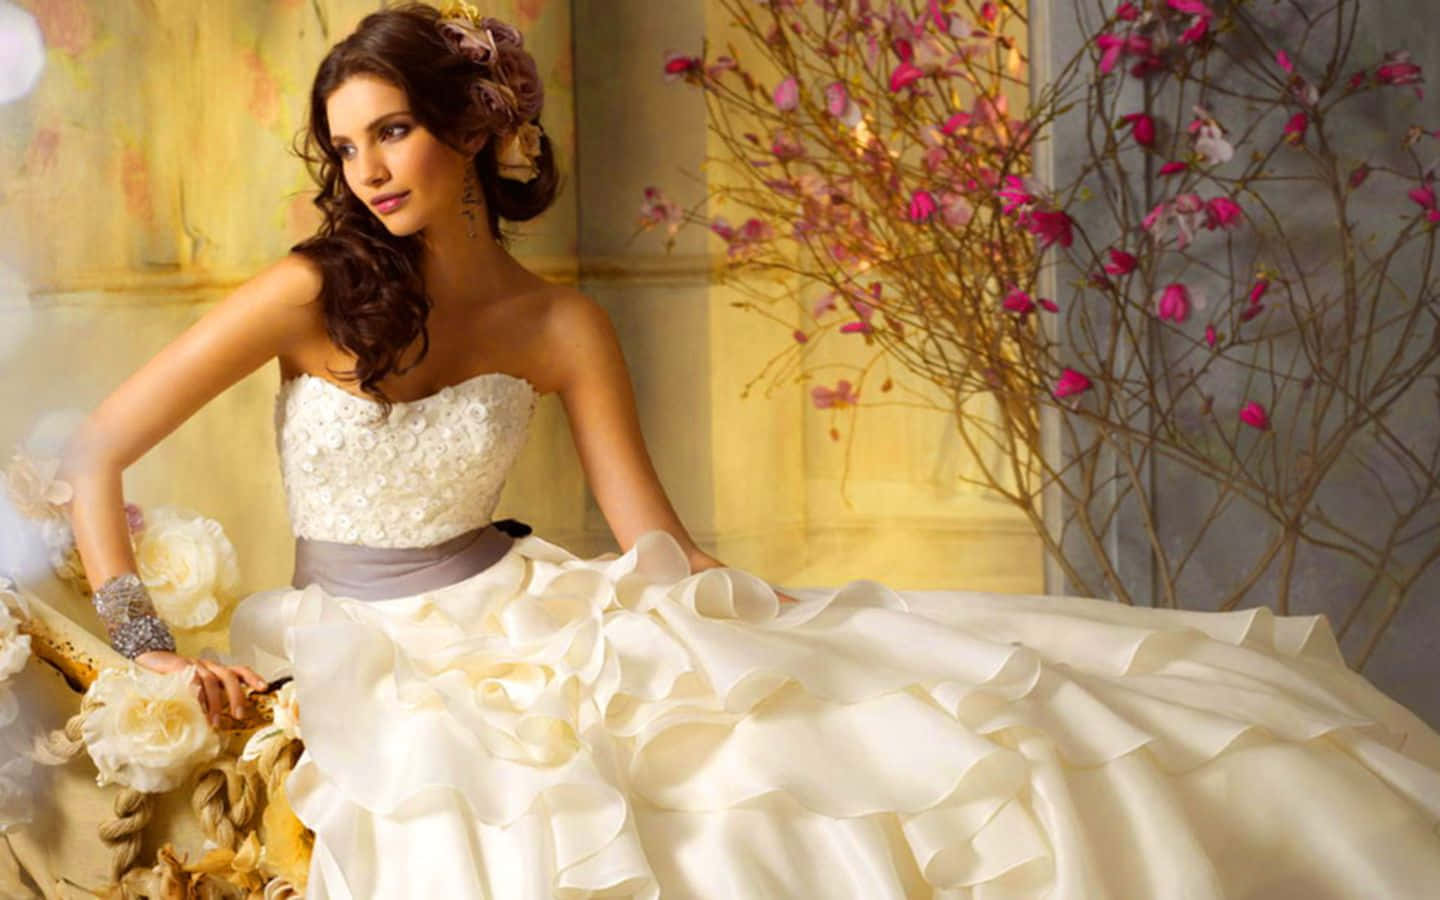 Elegant Bride in a Beautiful White Gown